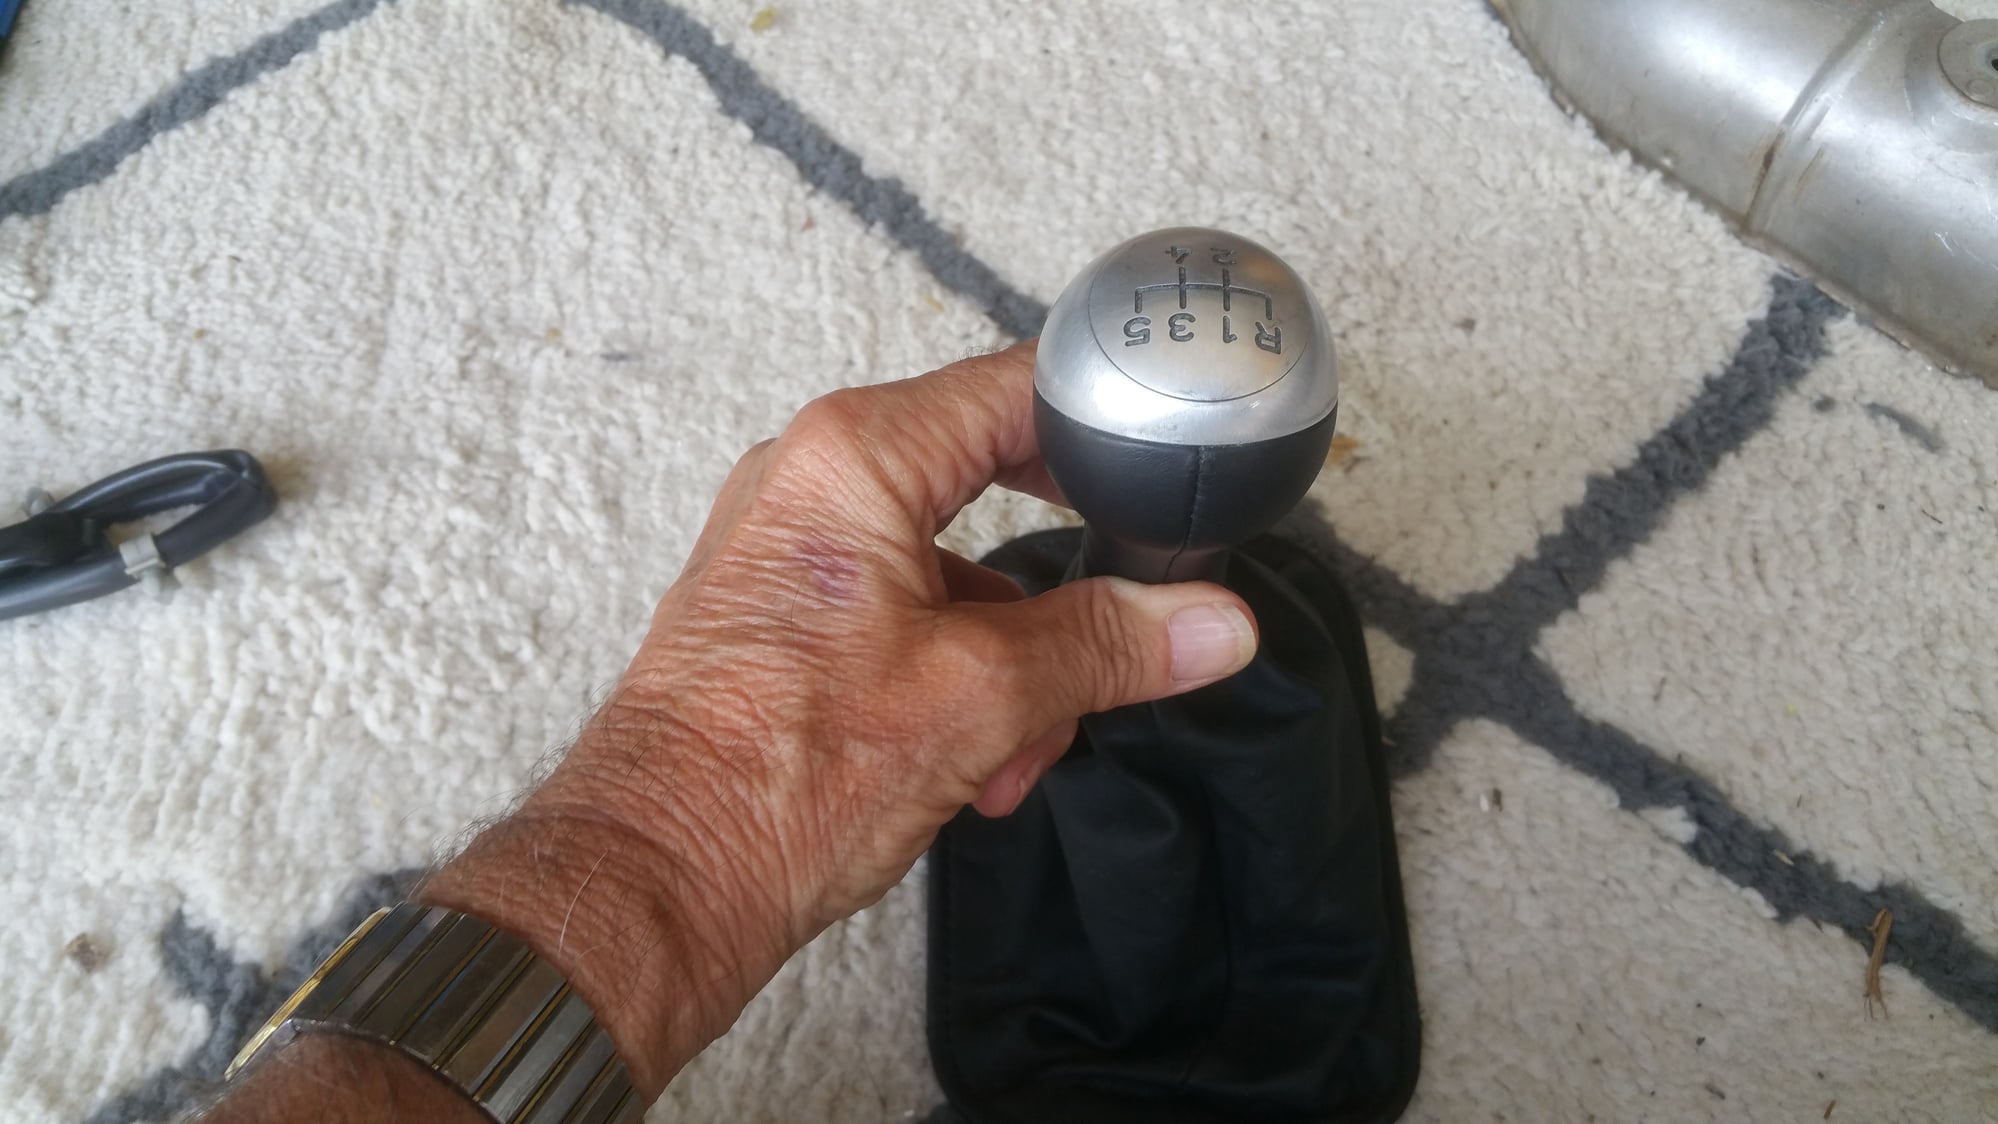 Miscellaneous - FS: Techequip weighted shift knob 964/993 - Used - Lakewood, CA 90712, United States